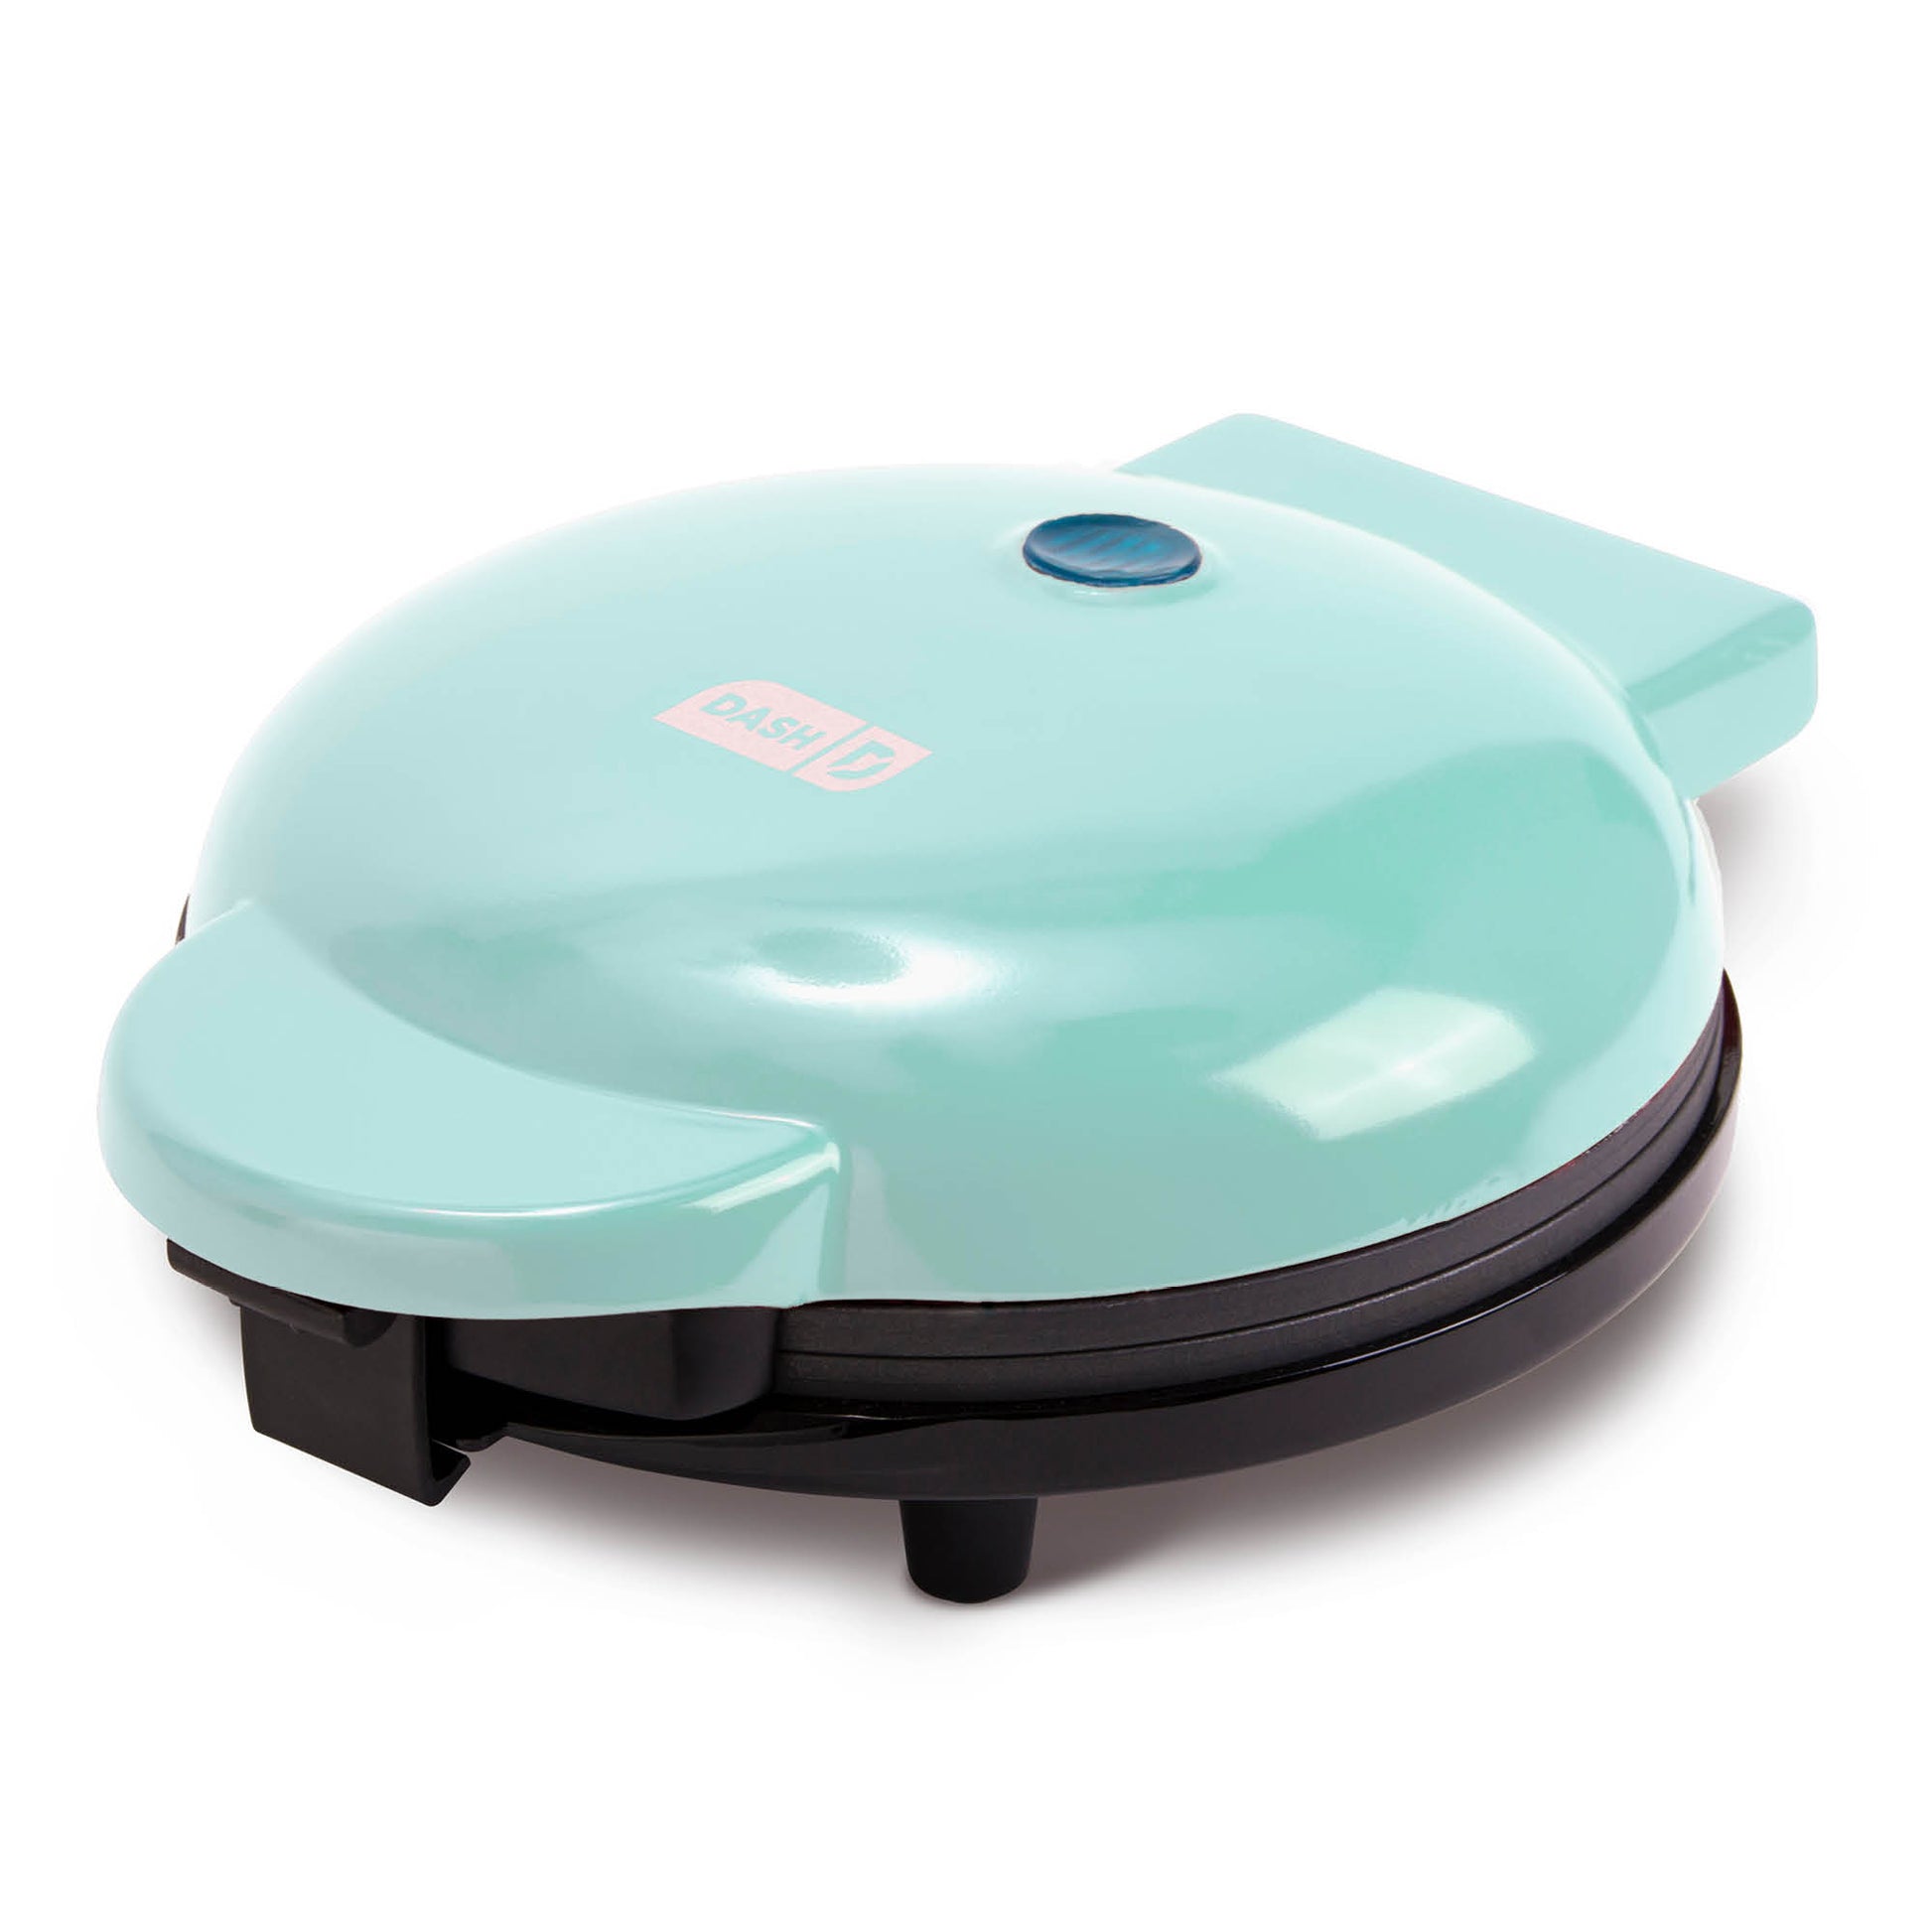 Dash Mini Maker Griddle, Teal, 4 inch cooking surface, new in box